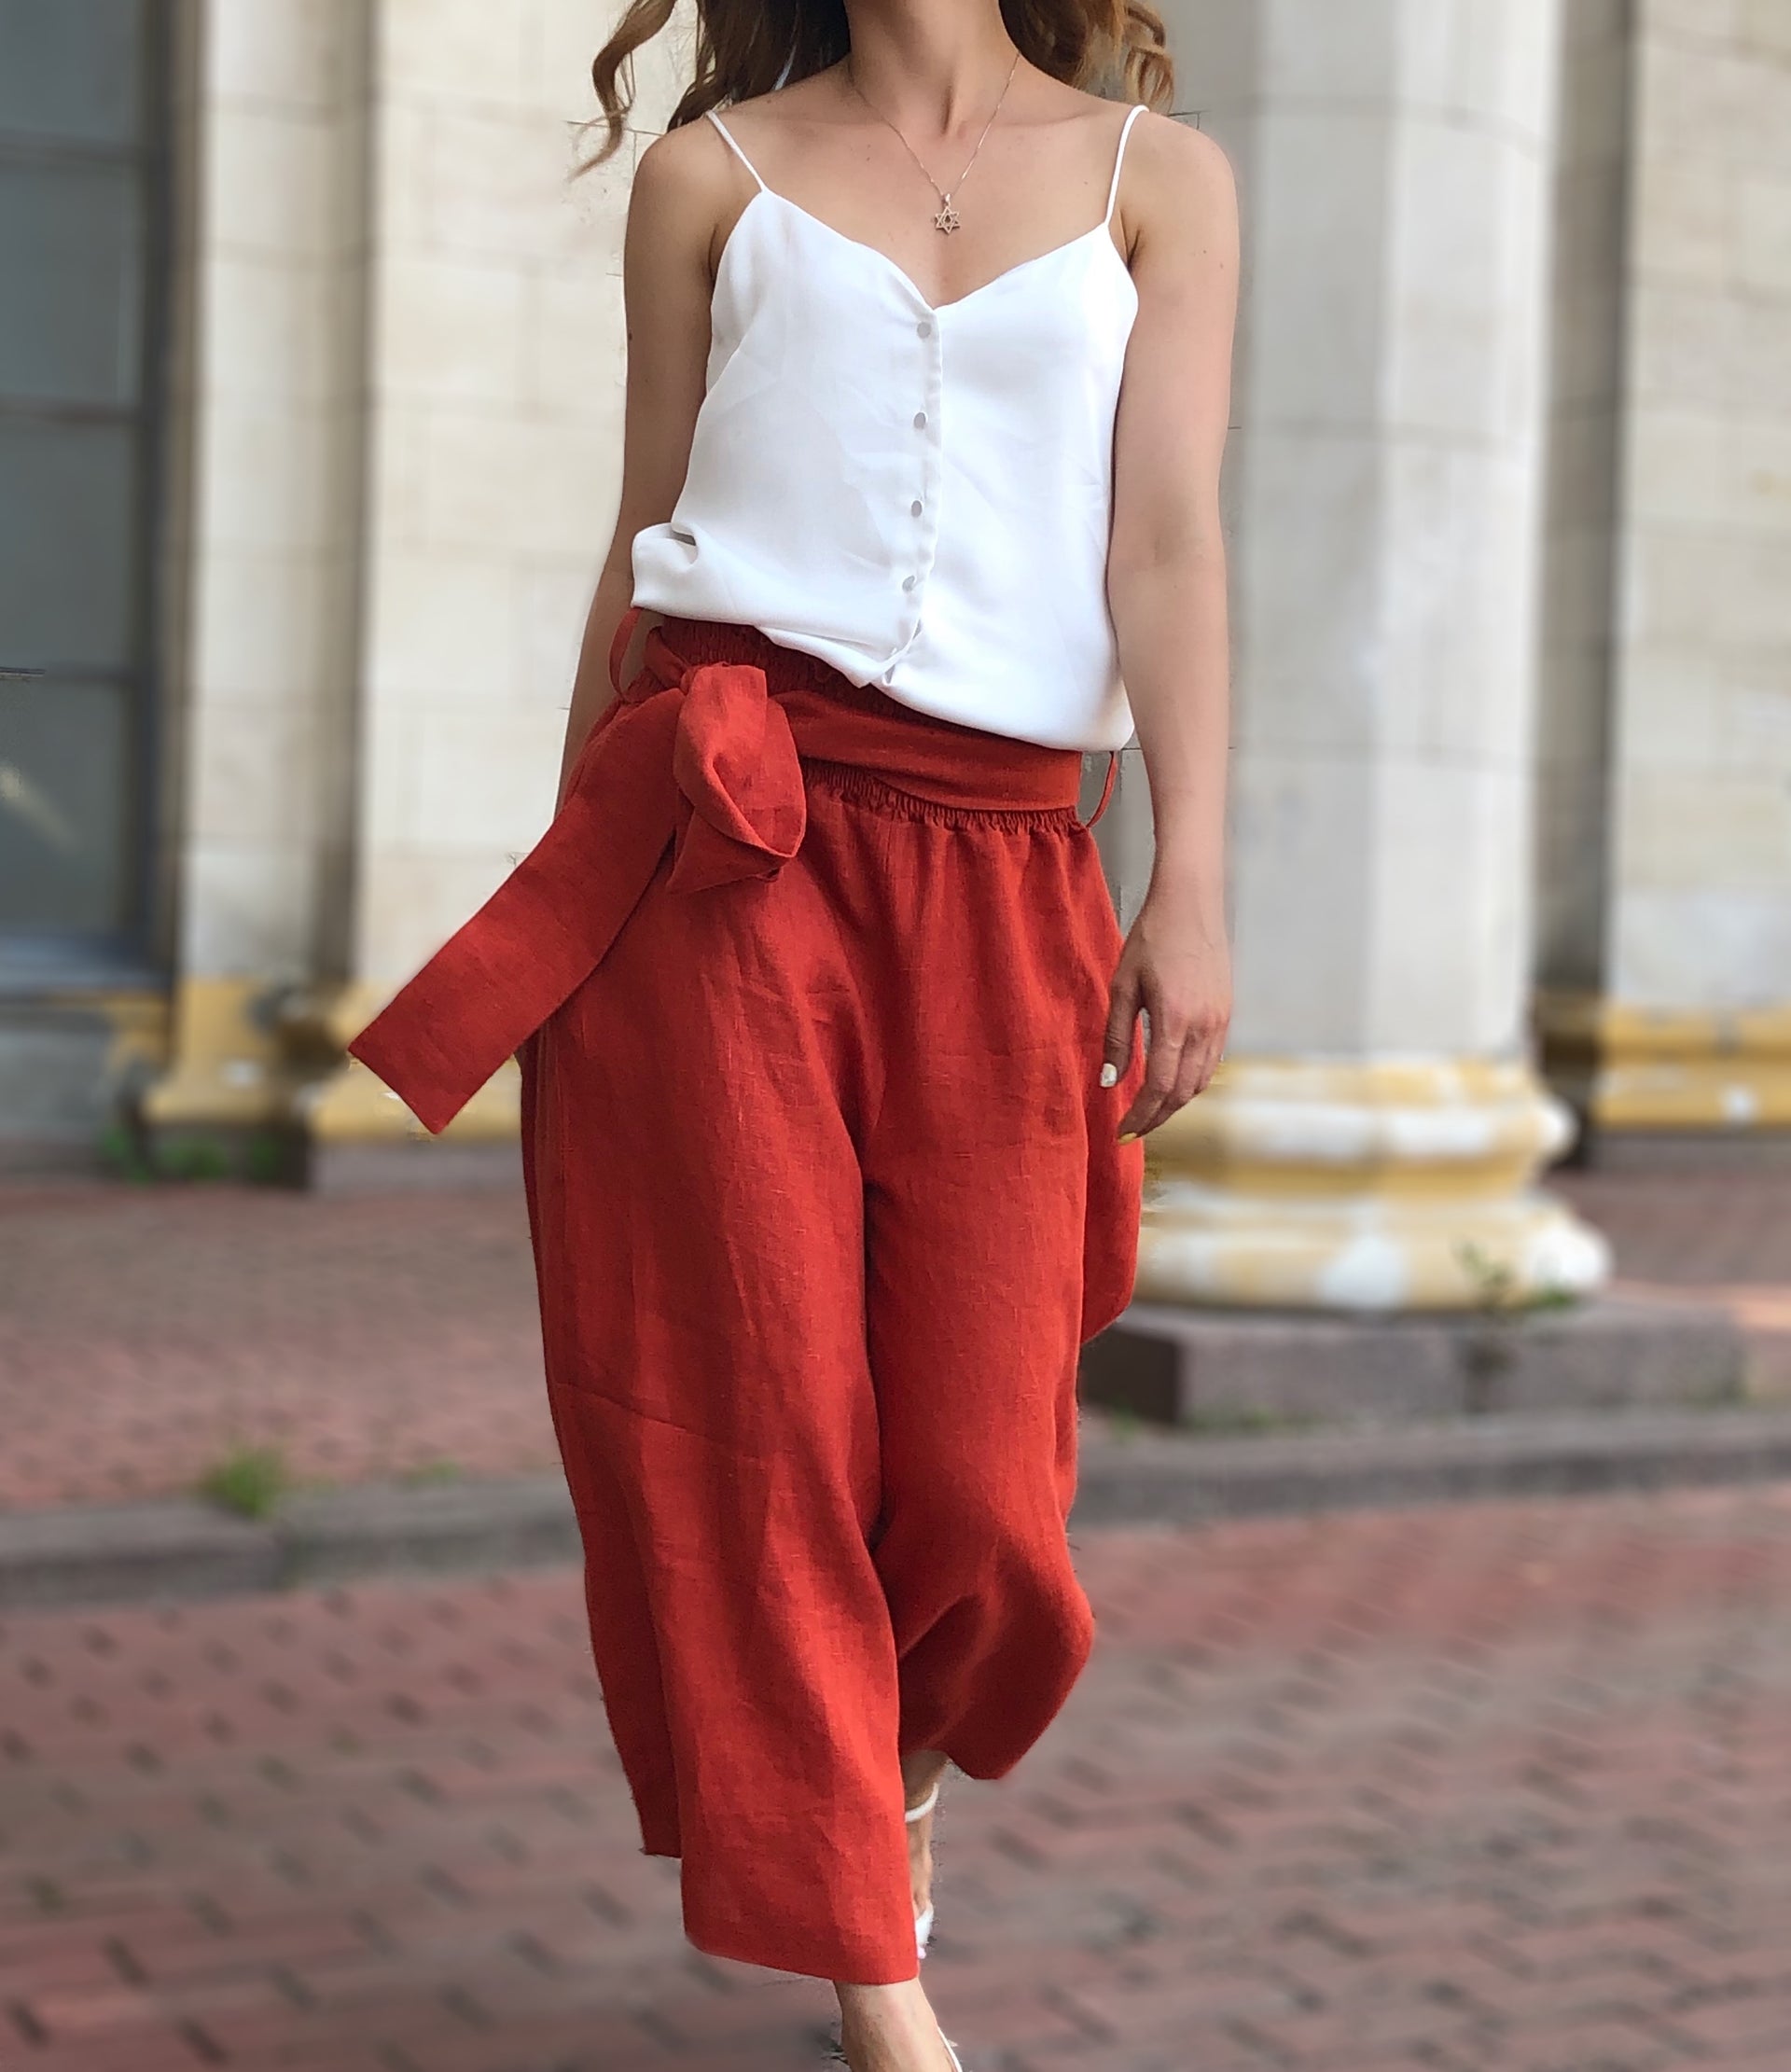 These Red Tops Will Dress Up Any Jeans for the Holidays - Sydne Style